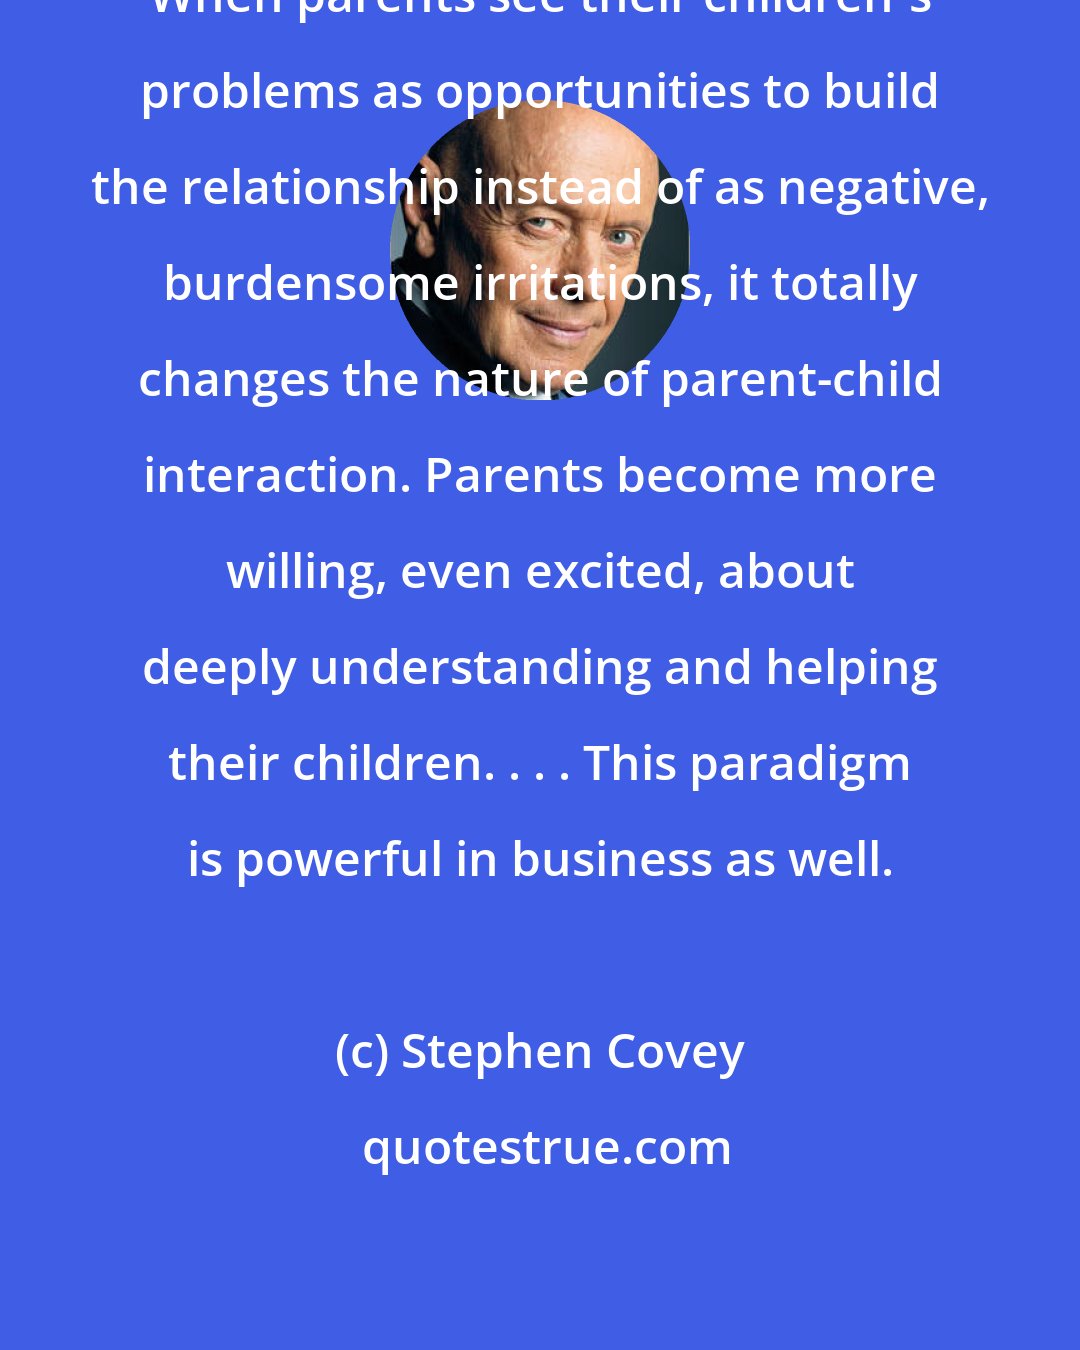 Stephen Covey: When parents see their children's problems as opportunities to build the relationship instead of as negative, burdensome irritations, it totally changes the nature of parent-child interaction. Parents become more willing, even excited, about deeply understanding and helping their children. . . . This paradigm is powerful in business as well.